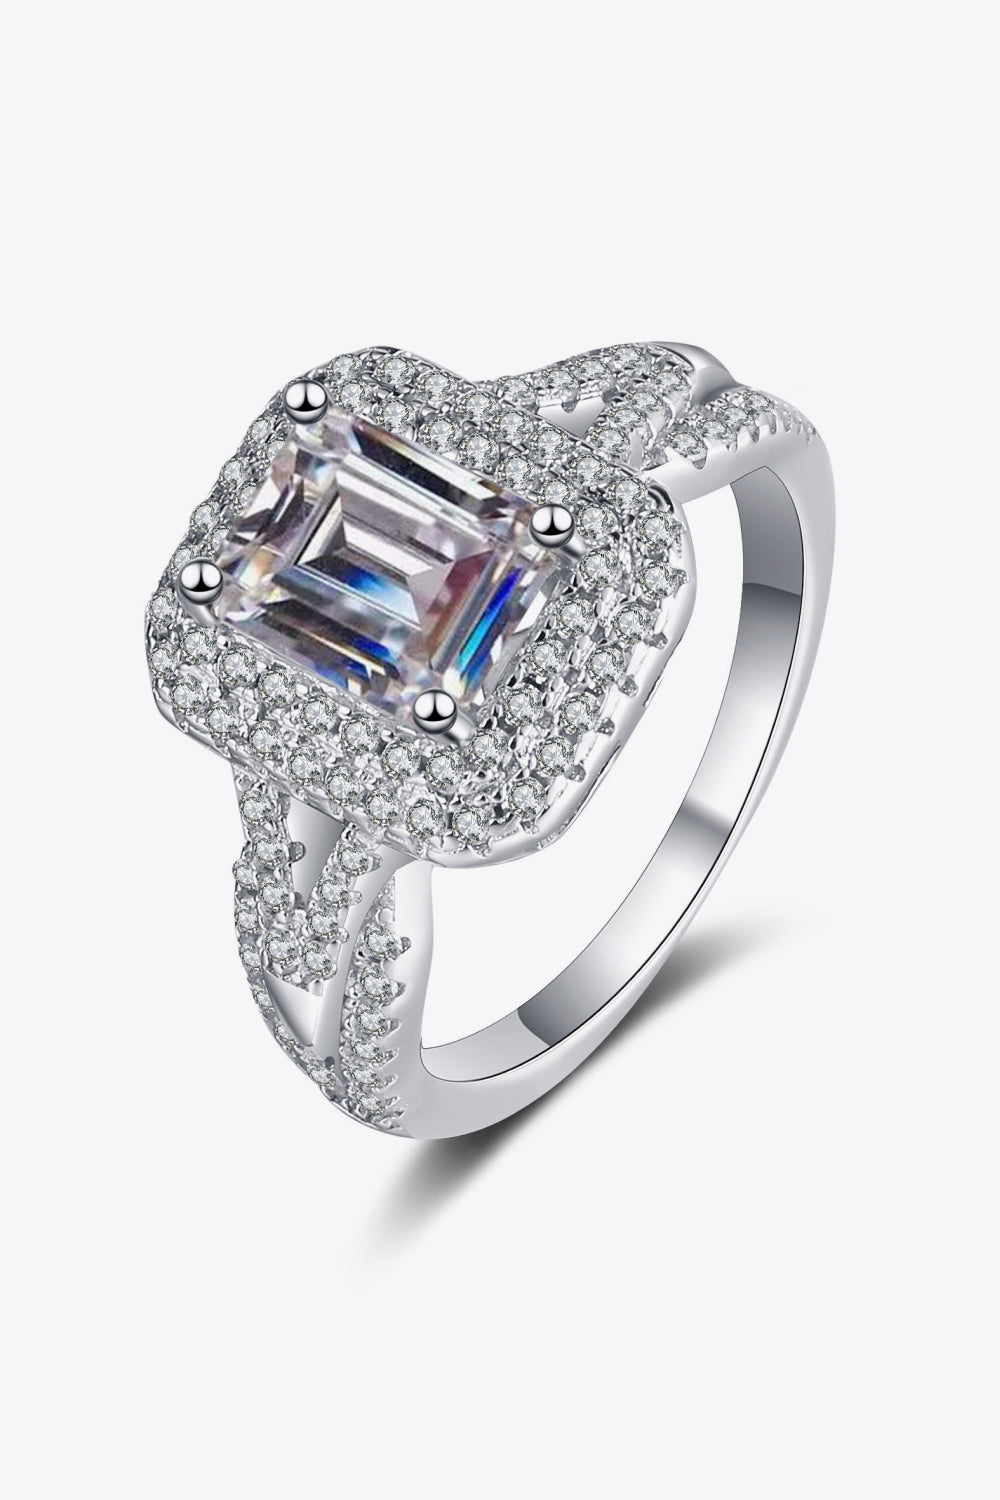 "Can't Stop Your Shine" 2 Carat Moissanite Ring